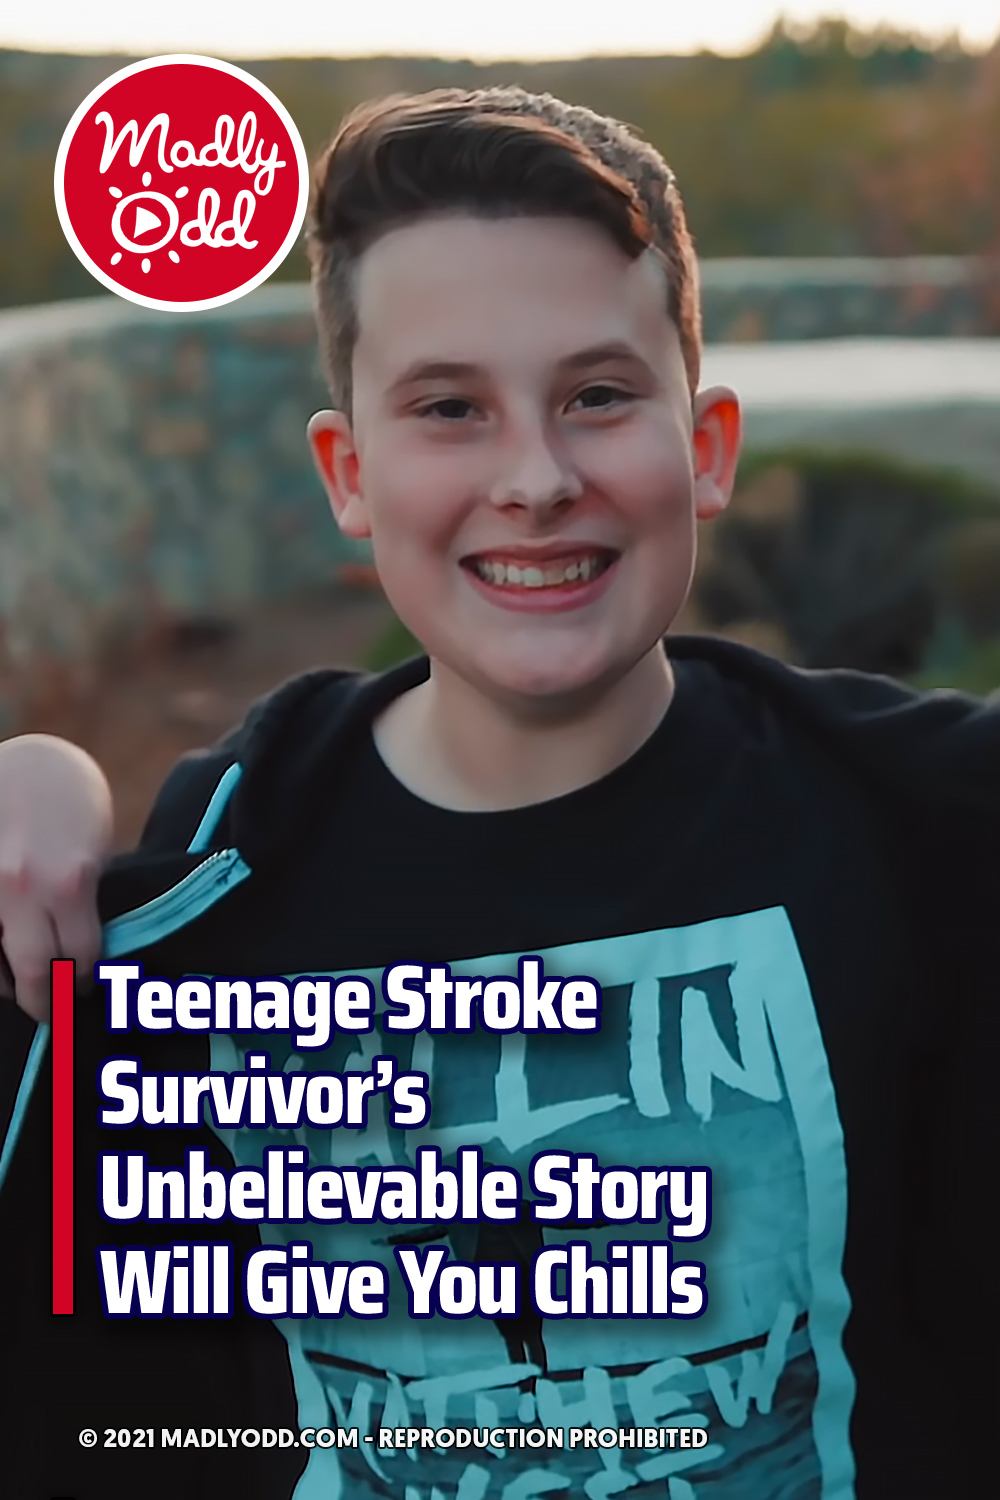 Teenage Stroke Survivor’s Unbelievable Story Will Give You Chills